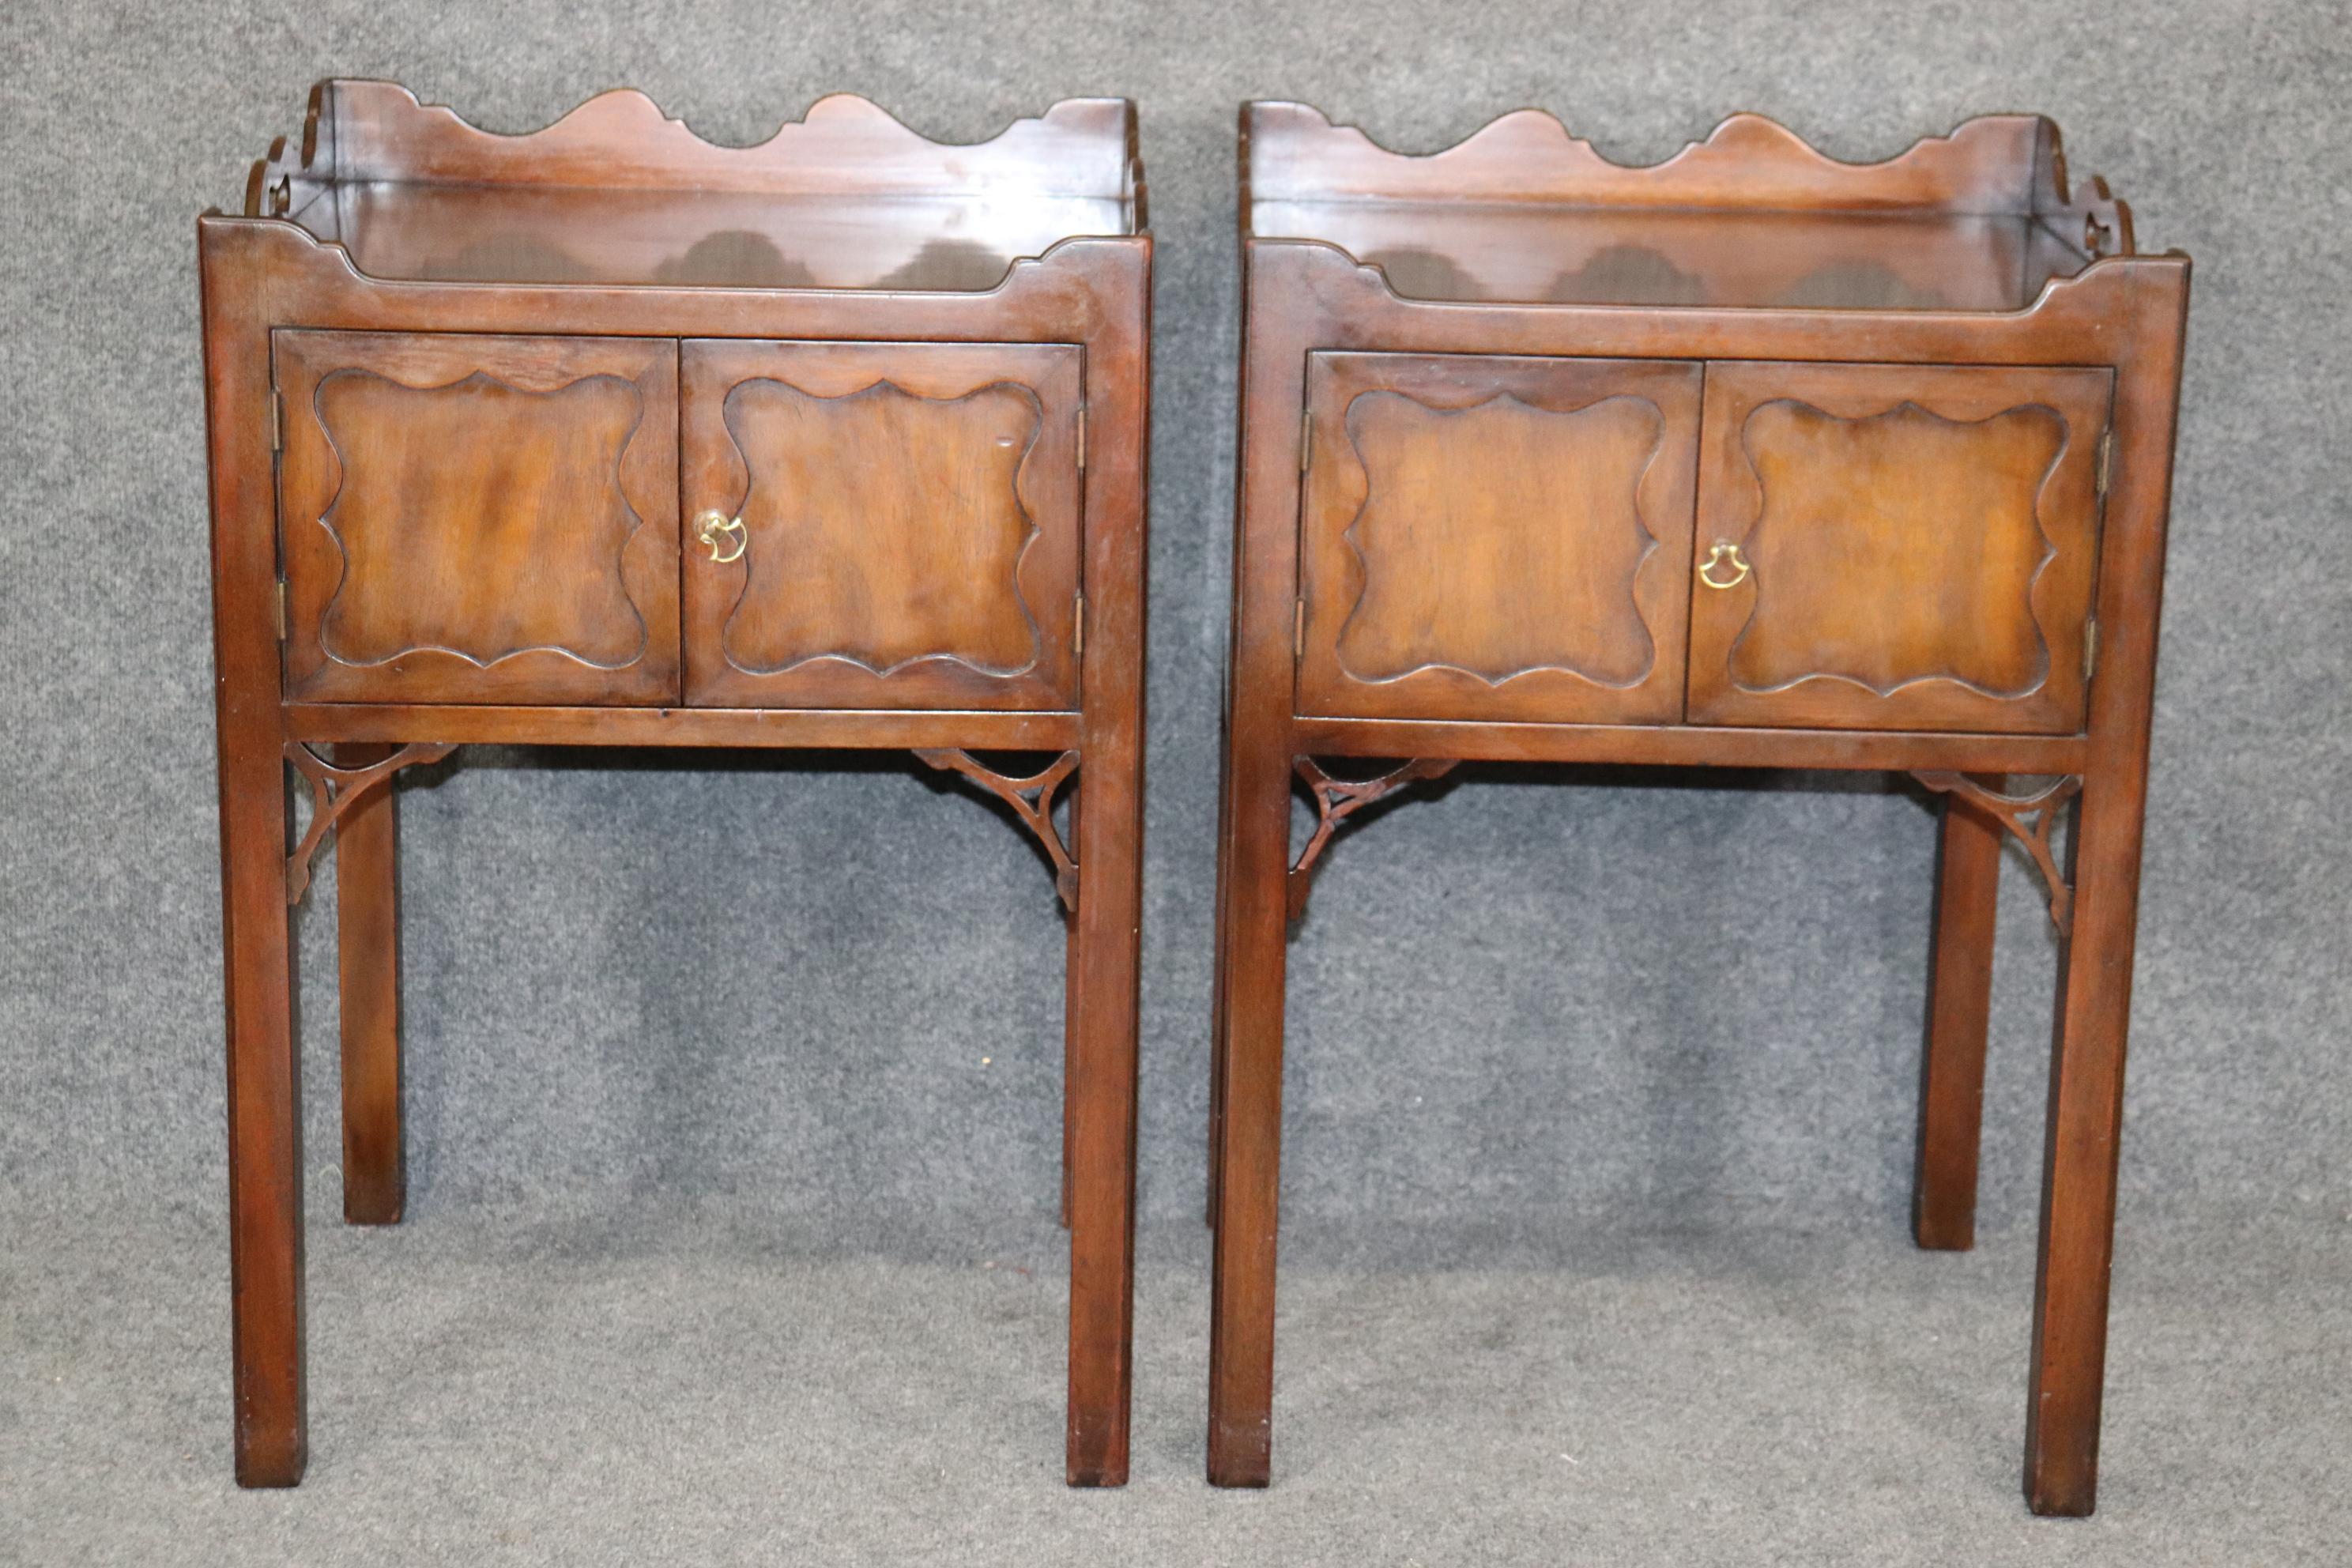 This is a gorgeous pair of Kittinger of Buffalo, New York CW collection nightstands or end tables. The tables are in good original condition and have their original finish and a nice patina. The stands are from a legendary company known for making